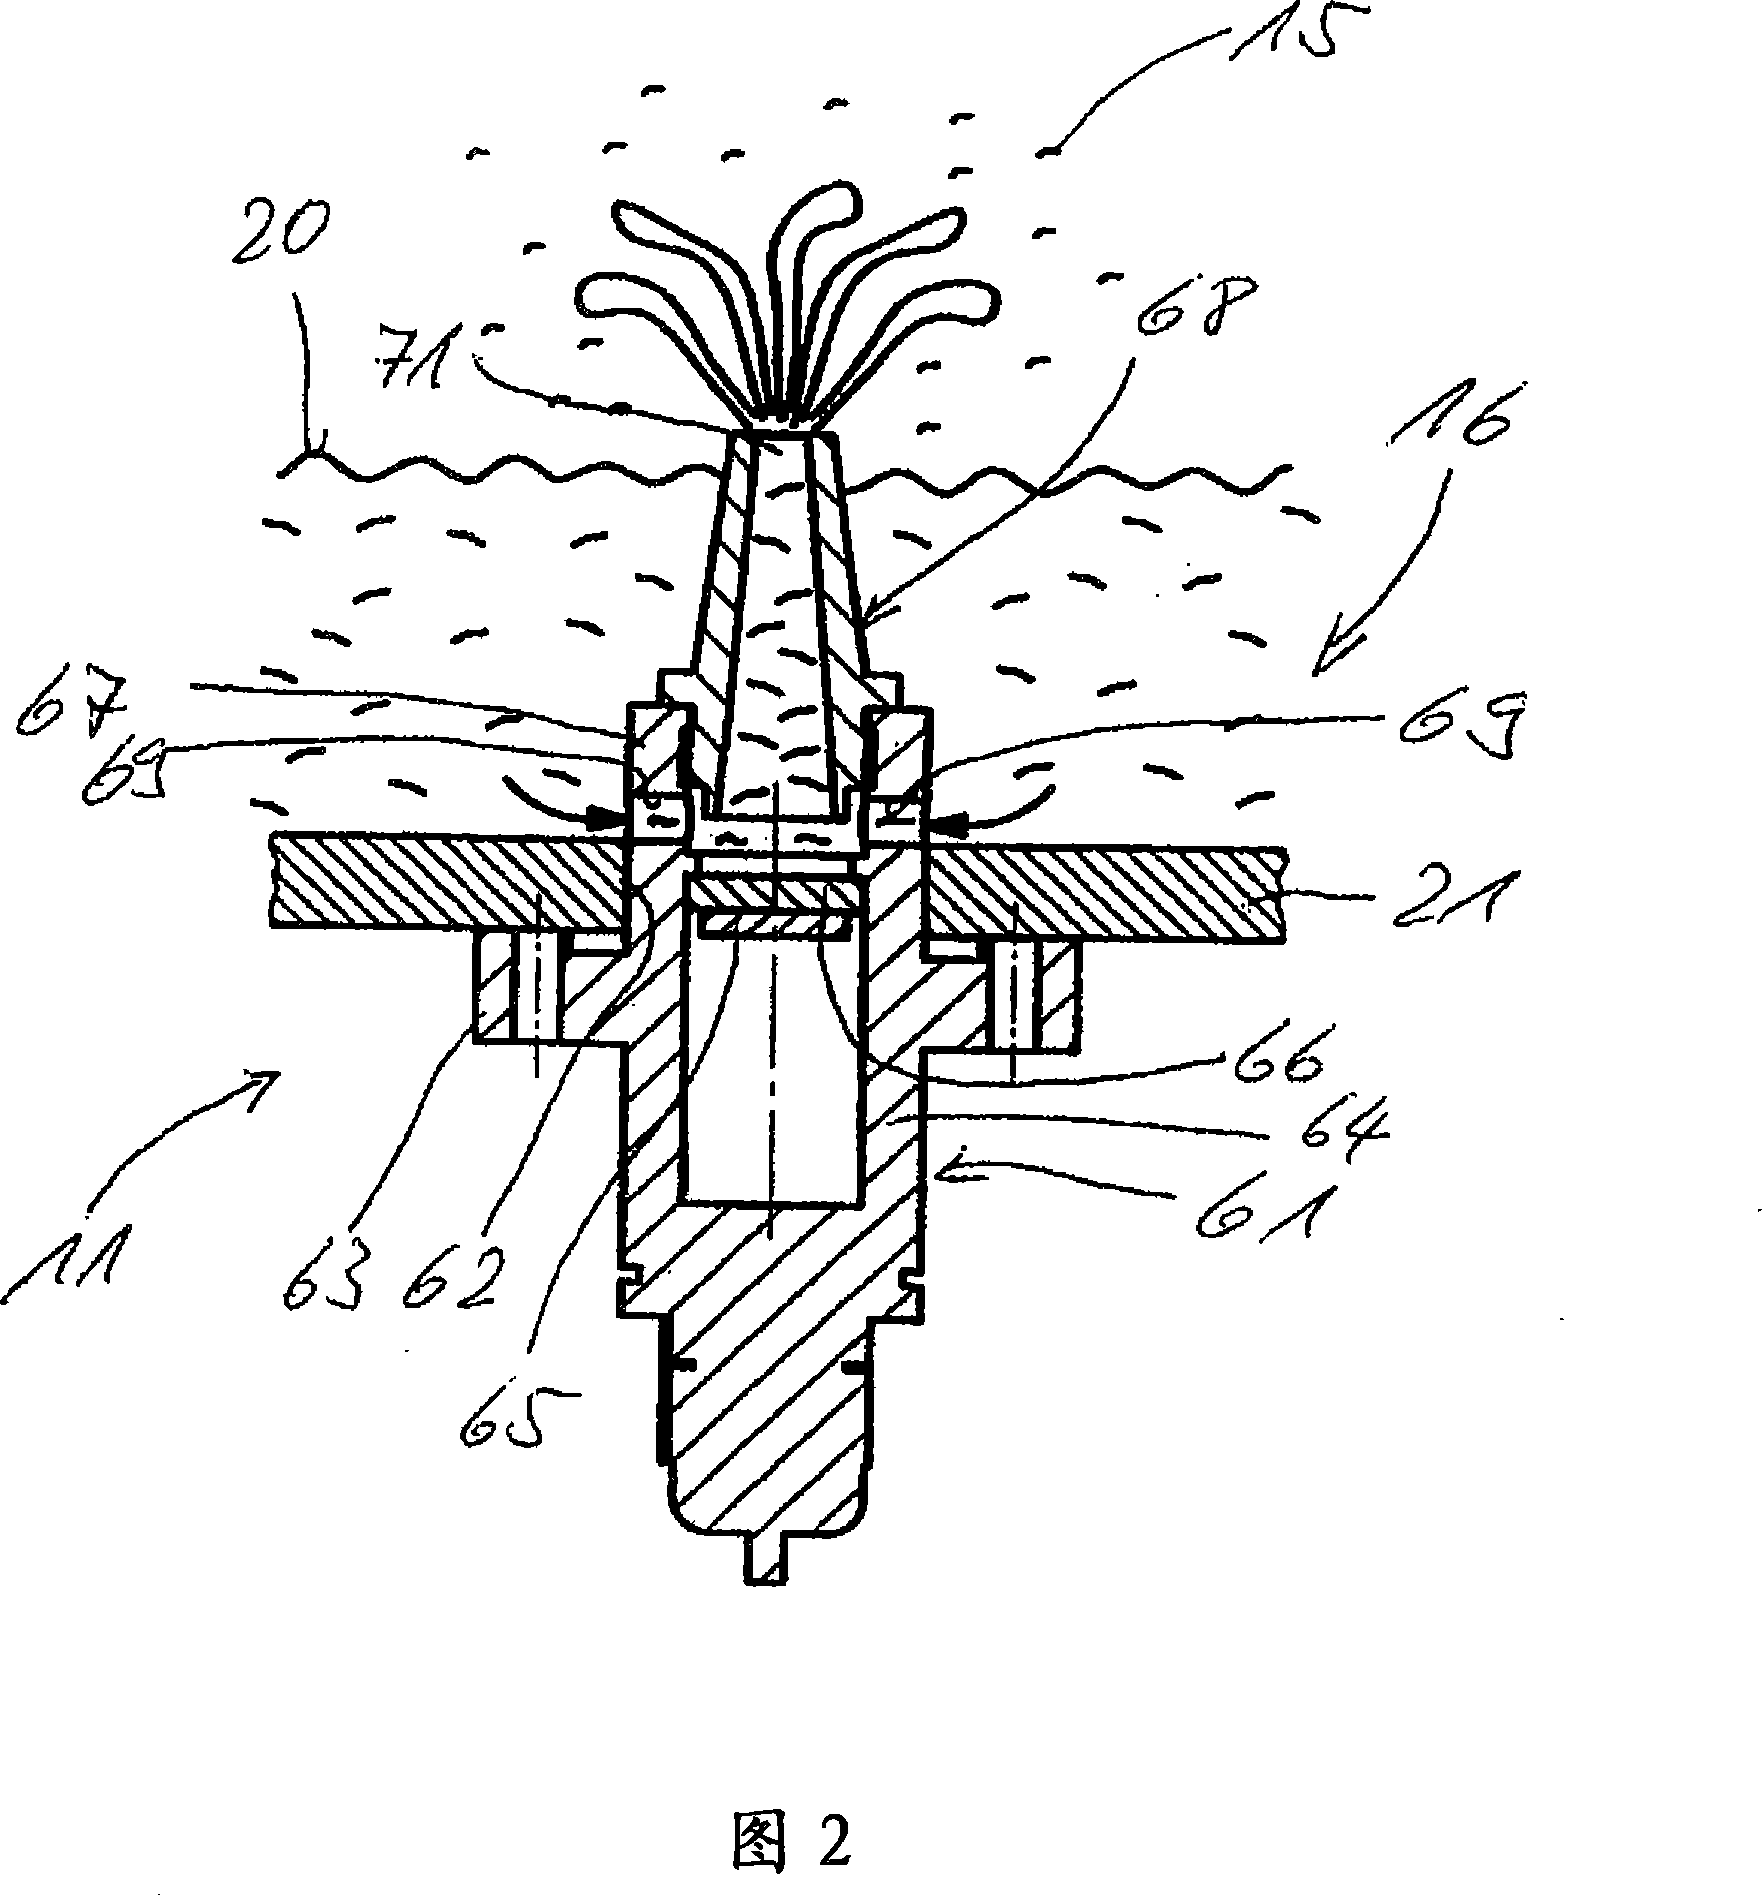 Device and method for application of an even thin fluid layer to substrates